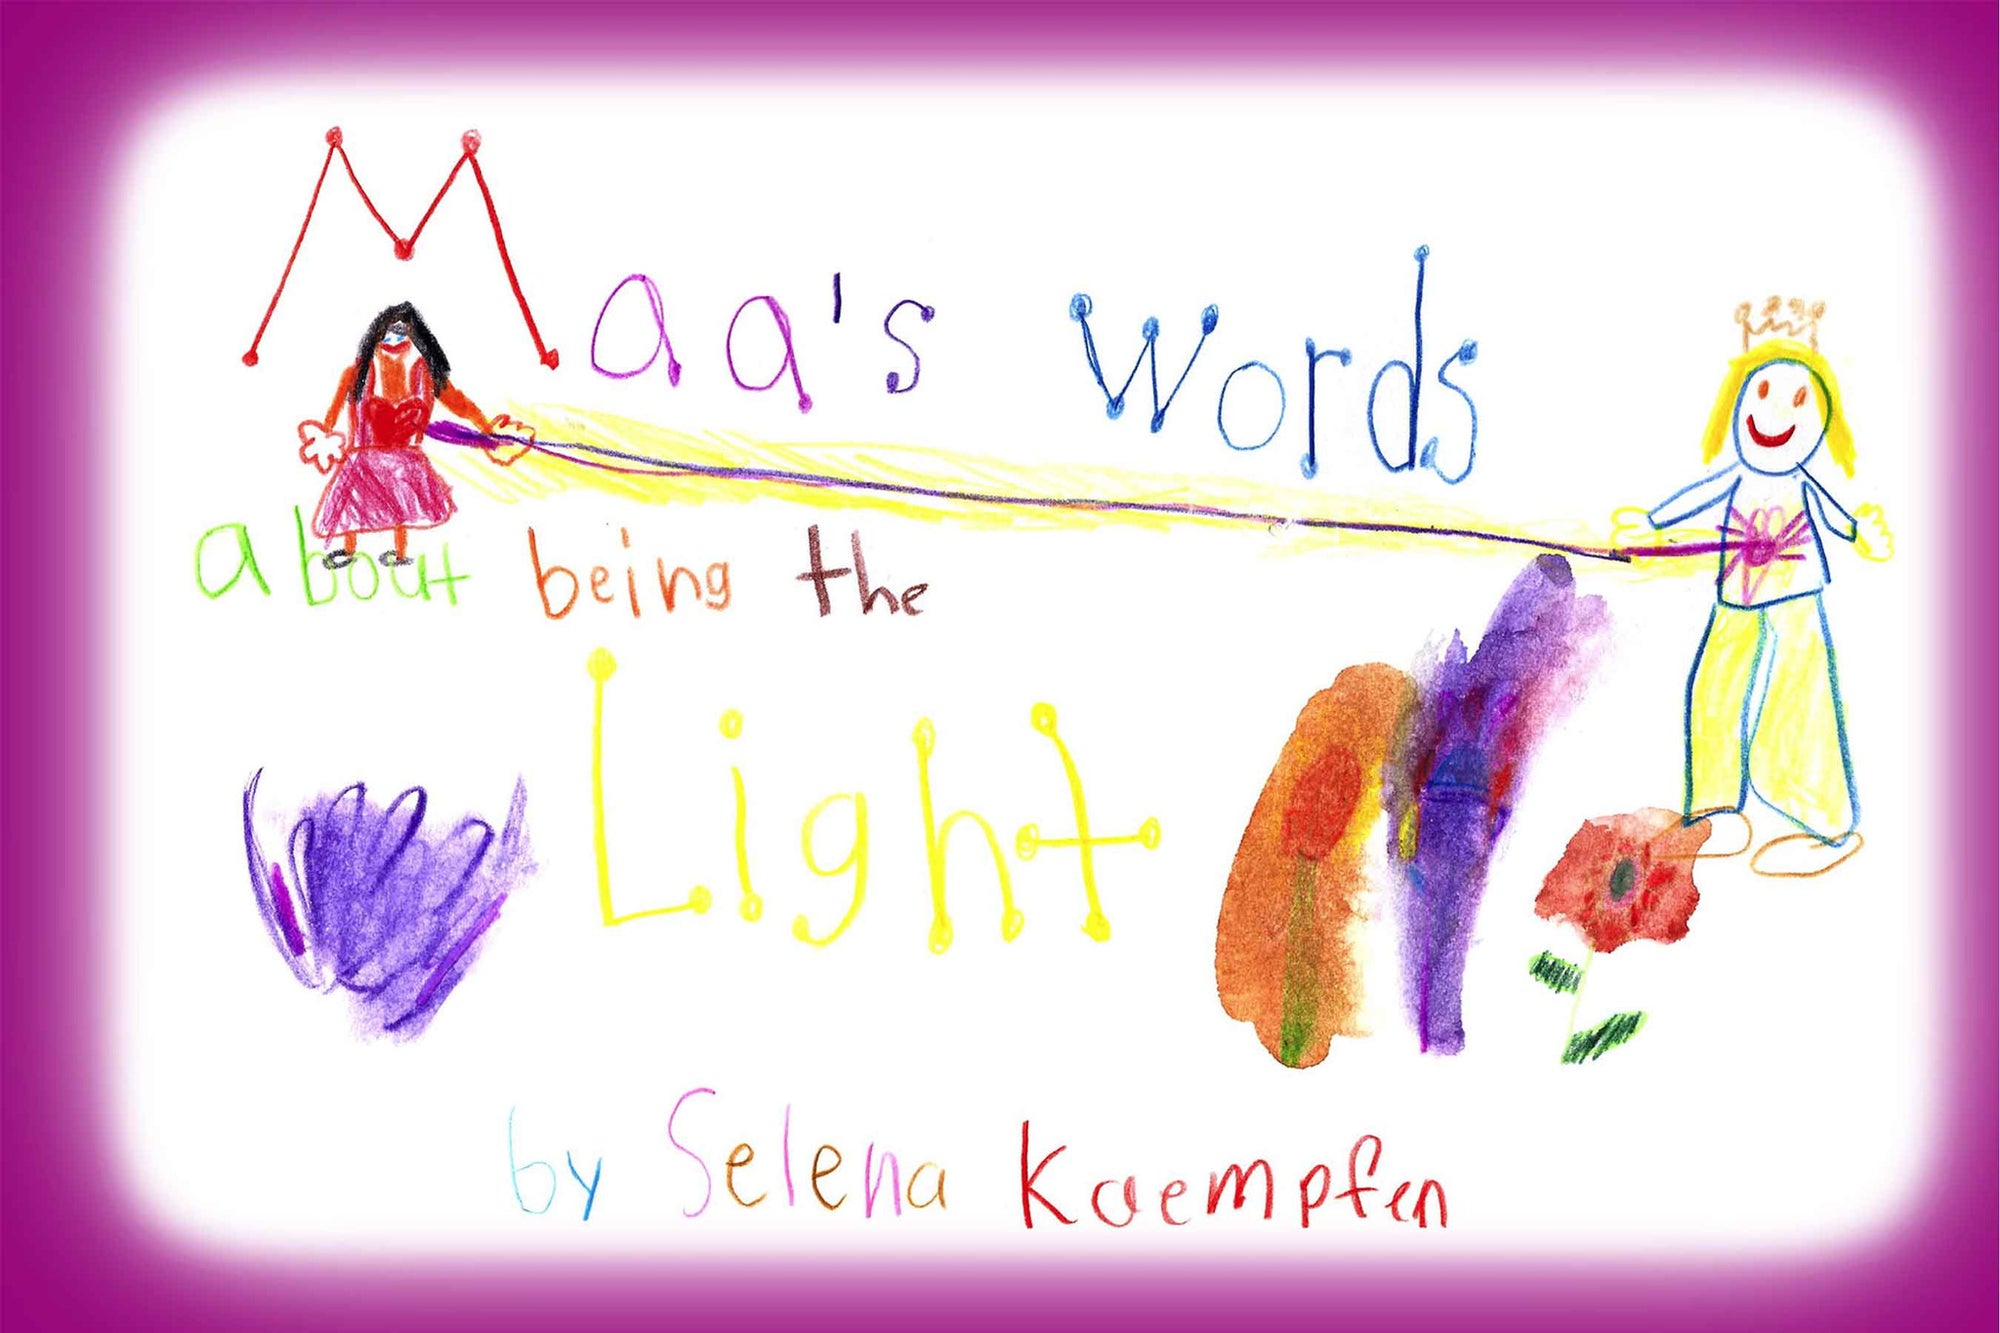 Maa's Words About Being the Light